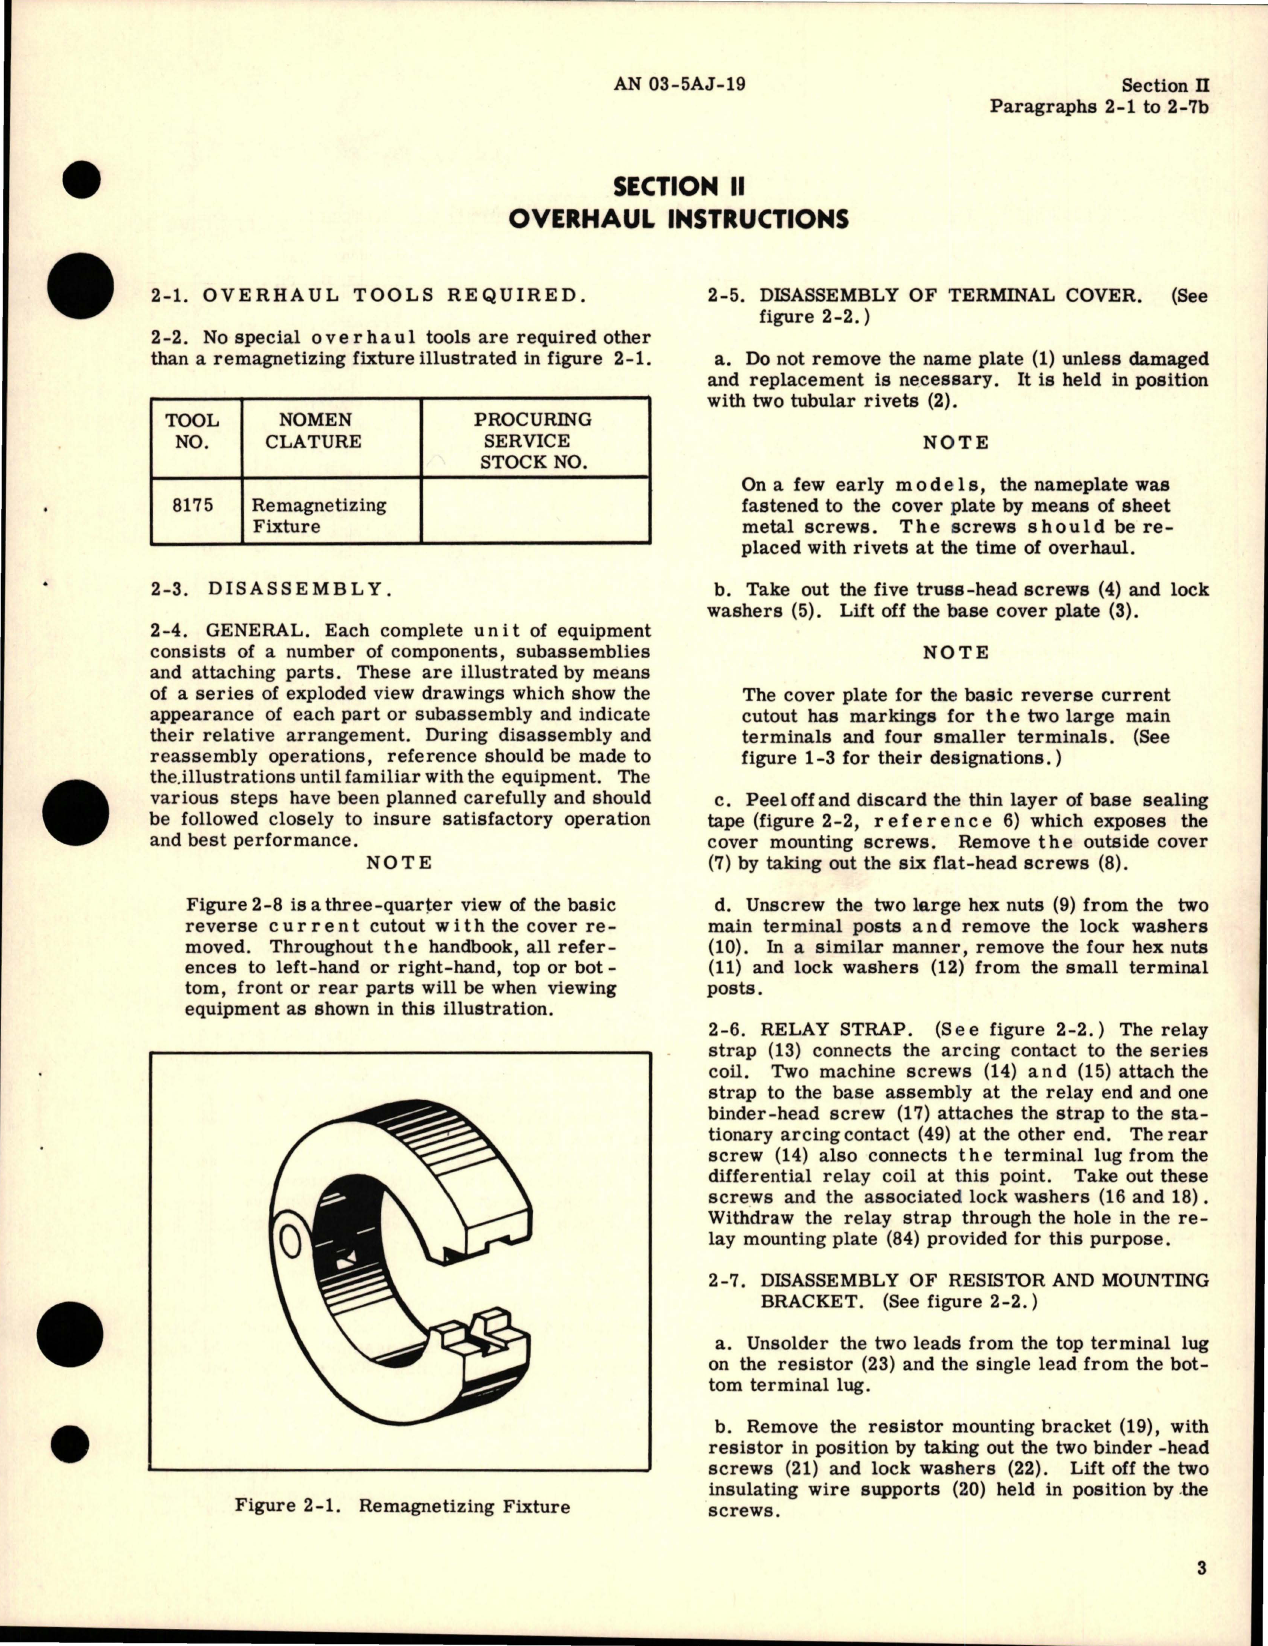 Sample page 7 from AirCorps Library document: Overhaul Instructions for Reverse Current Cutout - Model A-750D and Contactors - Models A-751D and A-751E